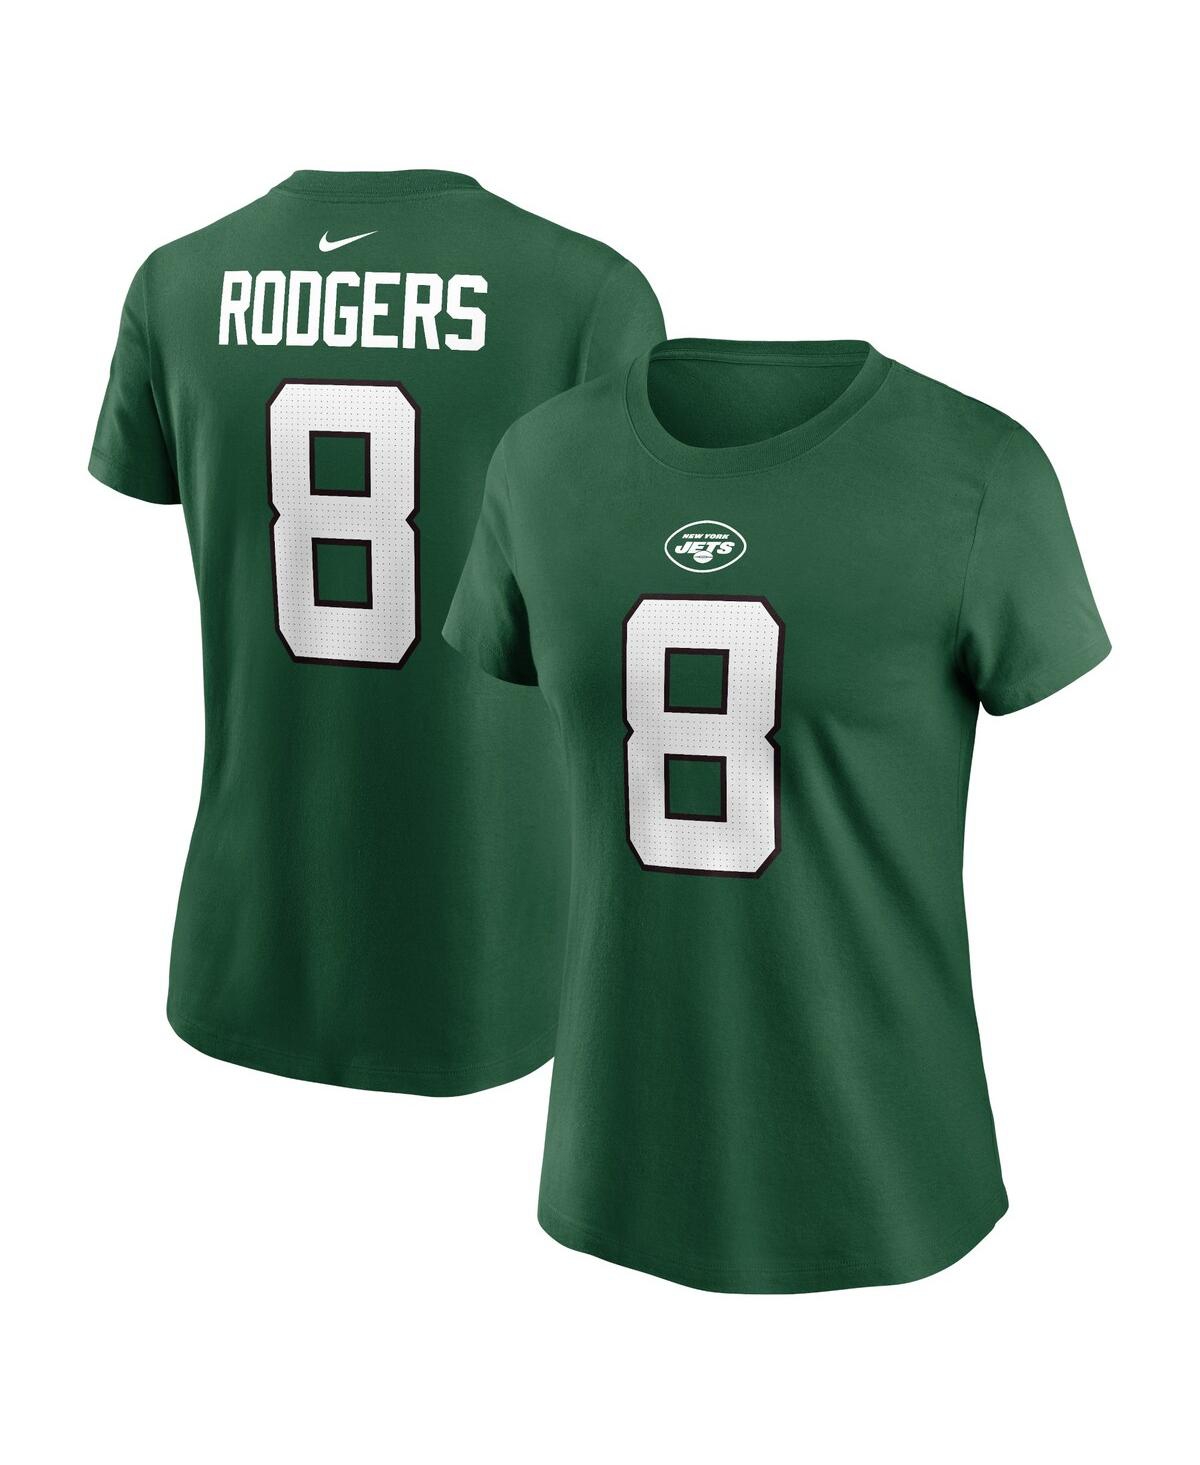 Women's Nike Aaron Rodgers Green New York Jets Player Name and Number T-shirt - Green